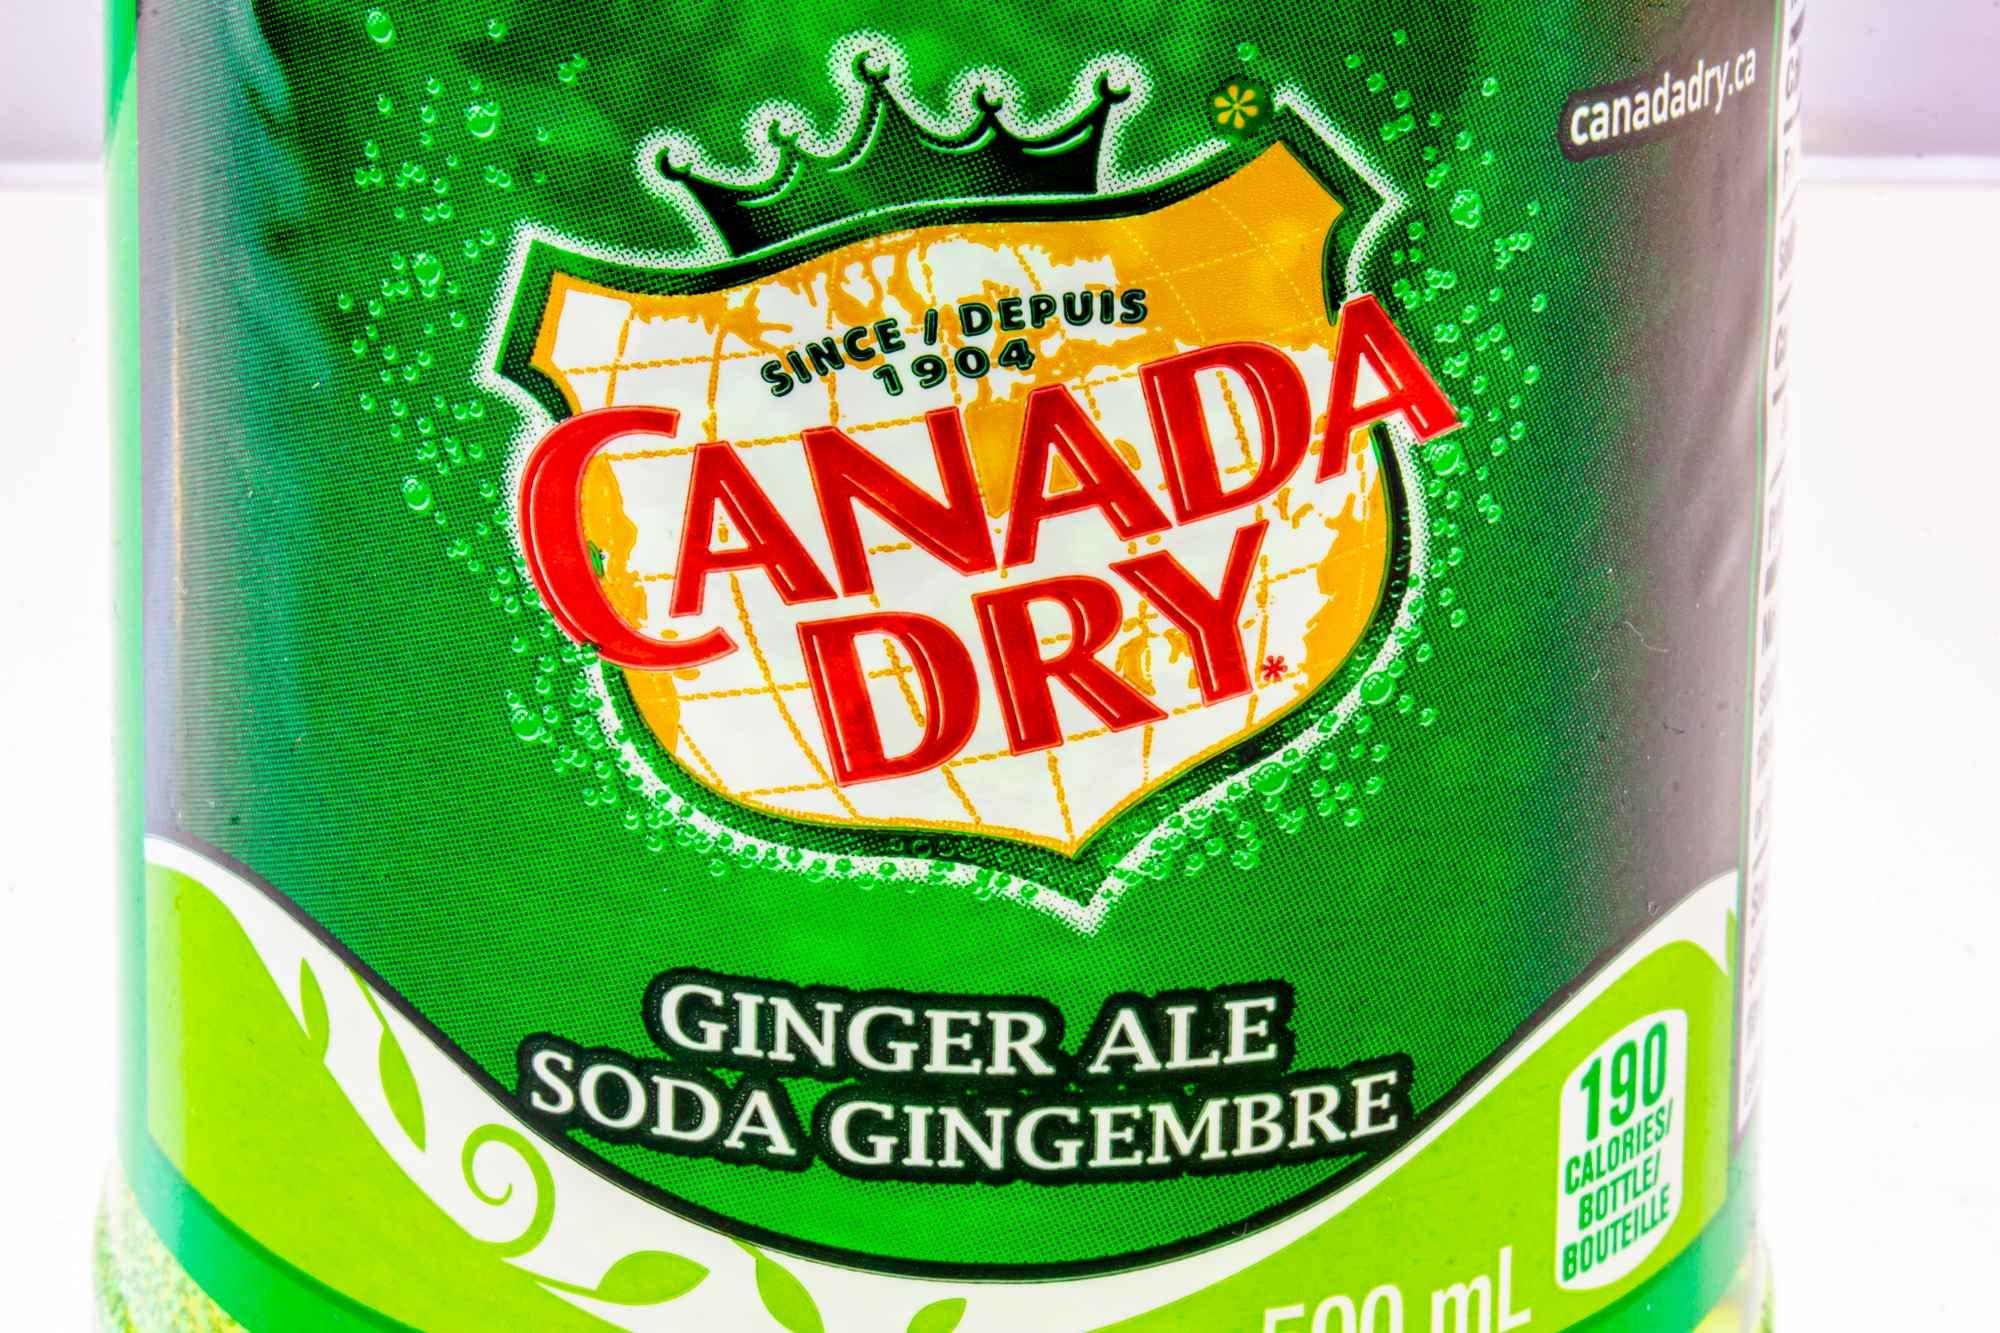 Canada dry ginger ale regarding the class action lawsuit settlement 